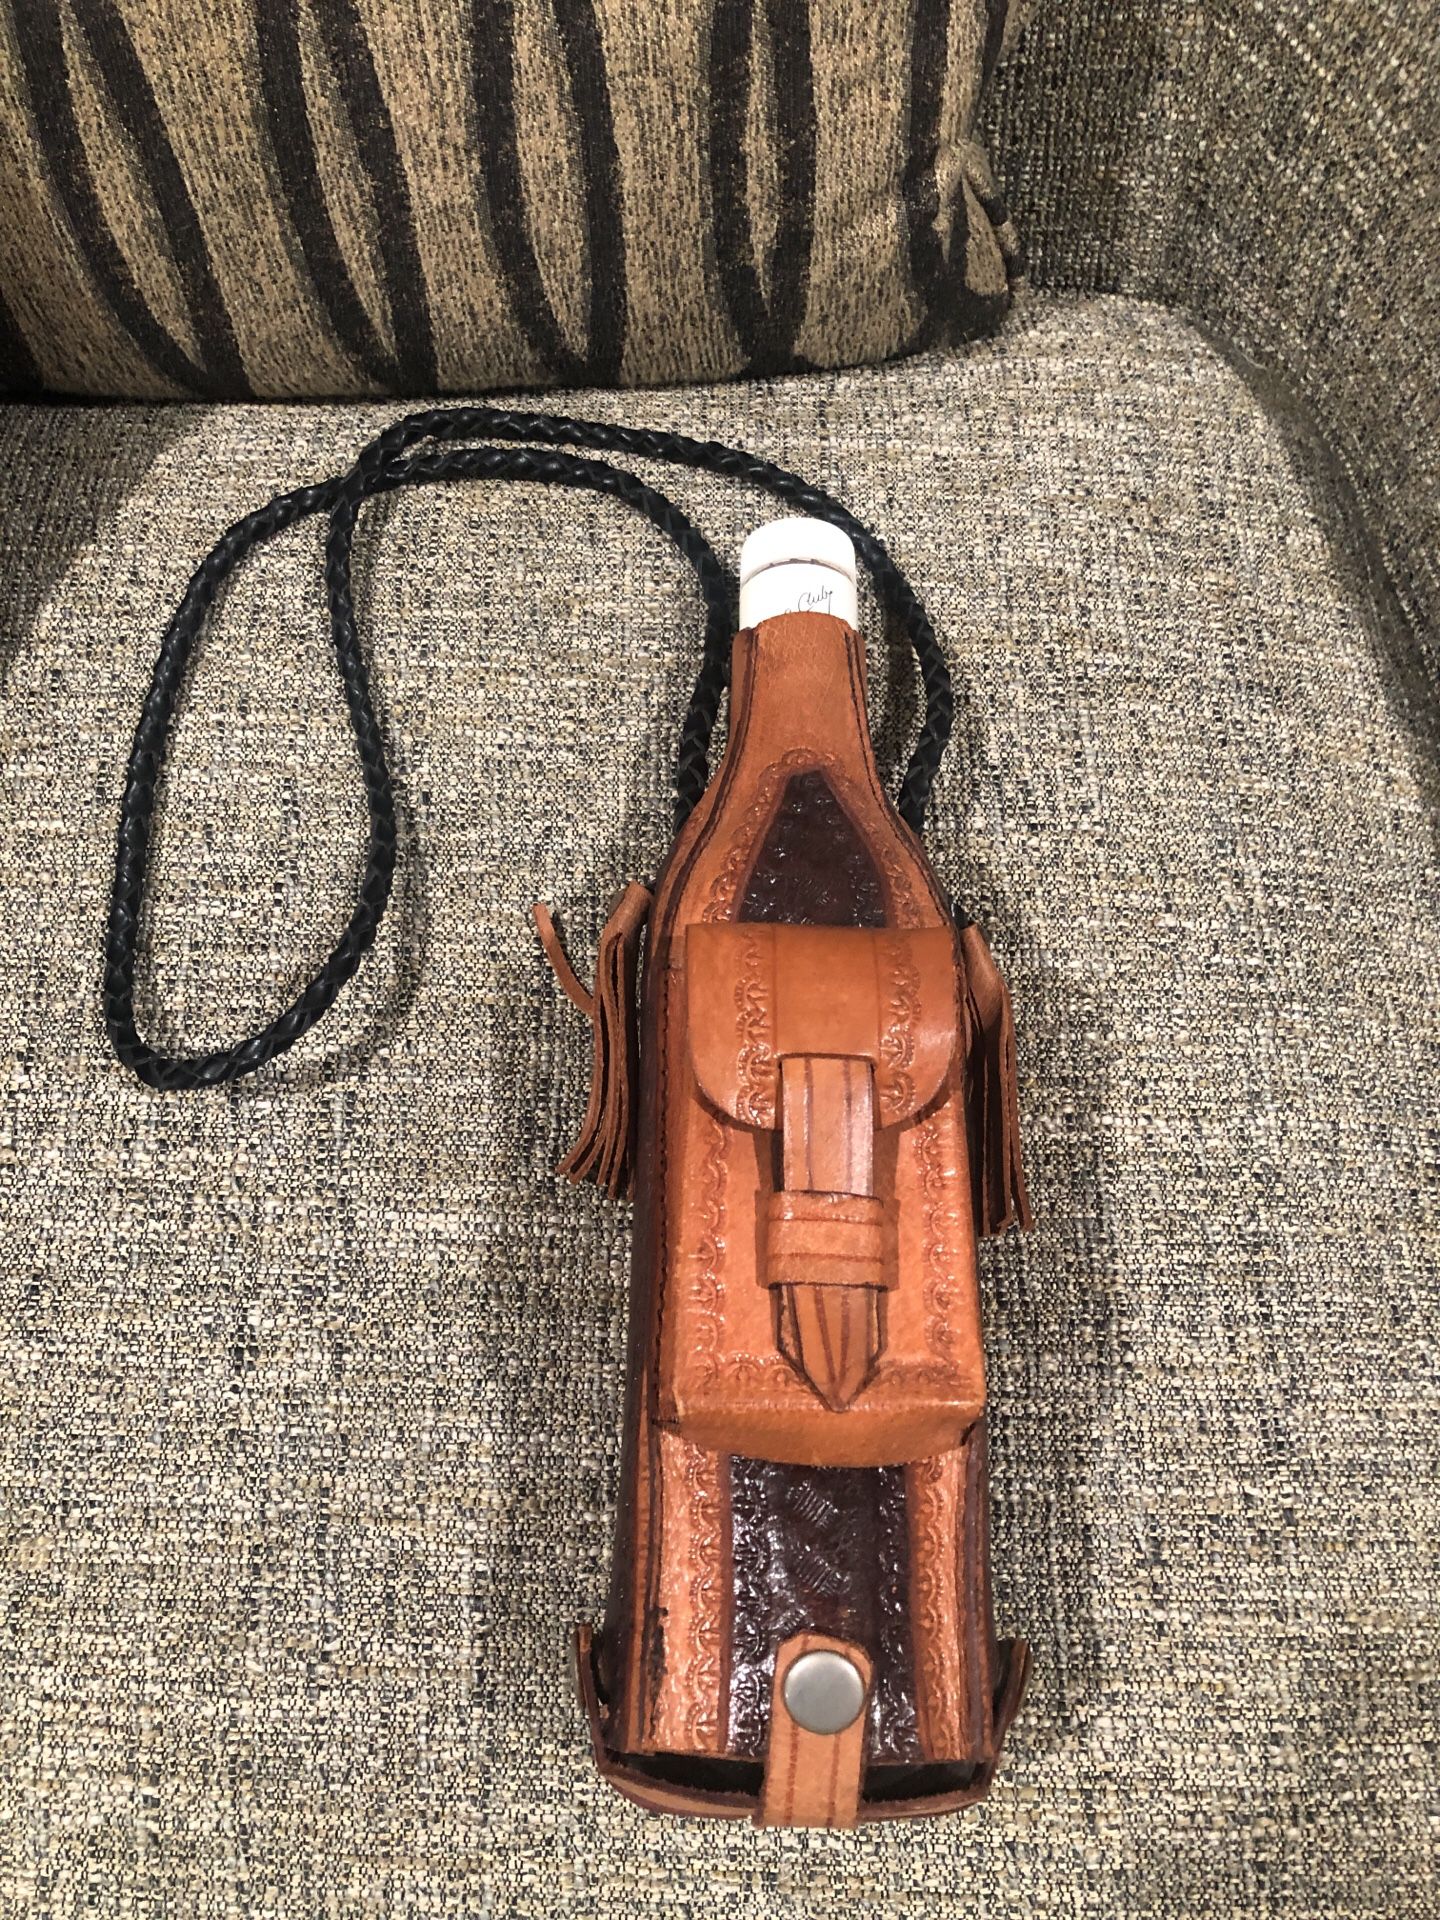 Vintage ELSALVADOR Leather Bottle Holder. Please see all the pictures and read the description